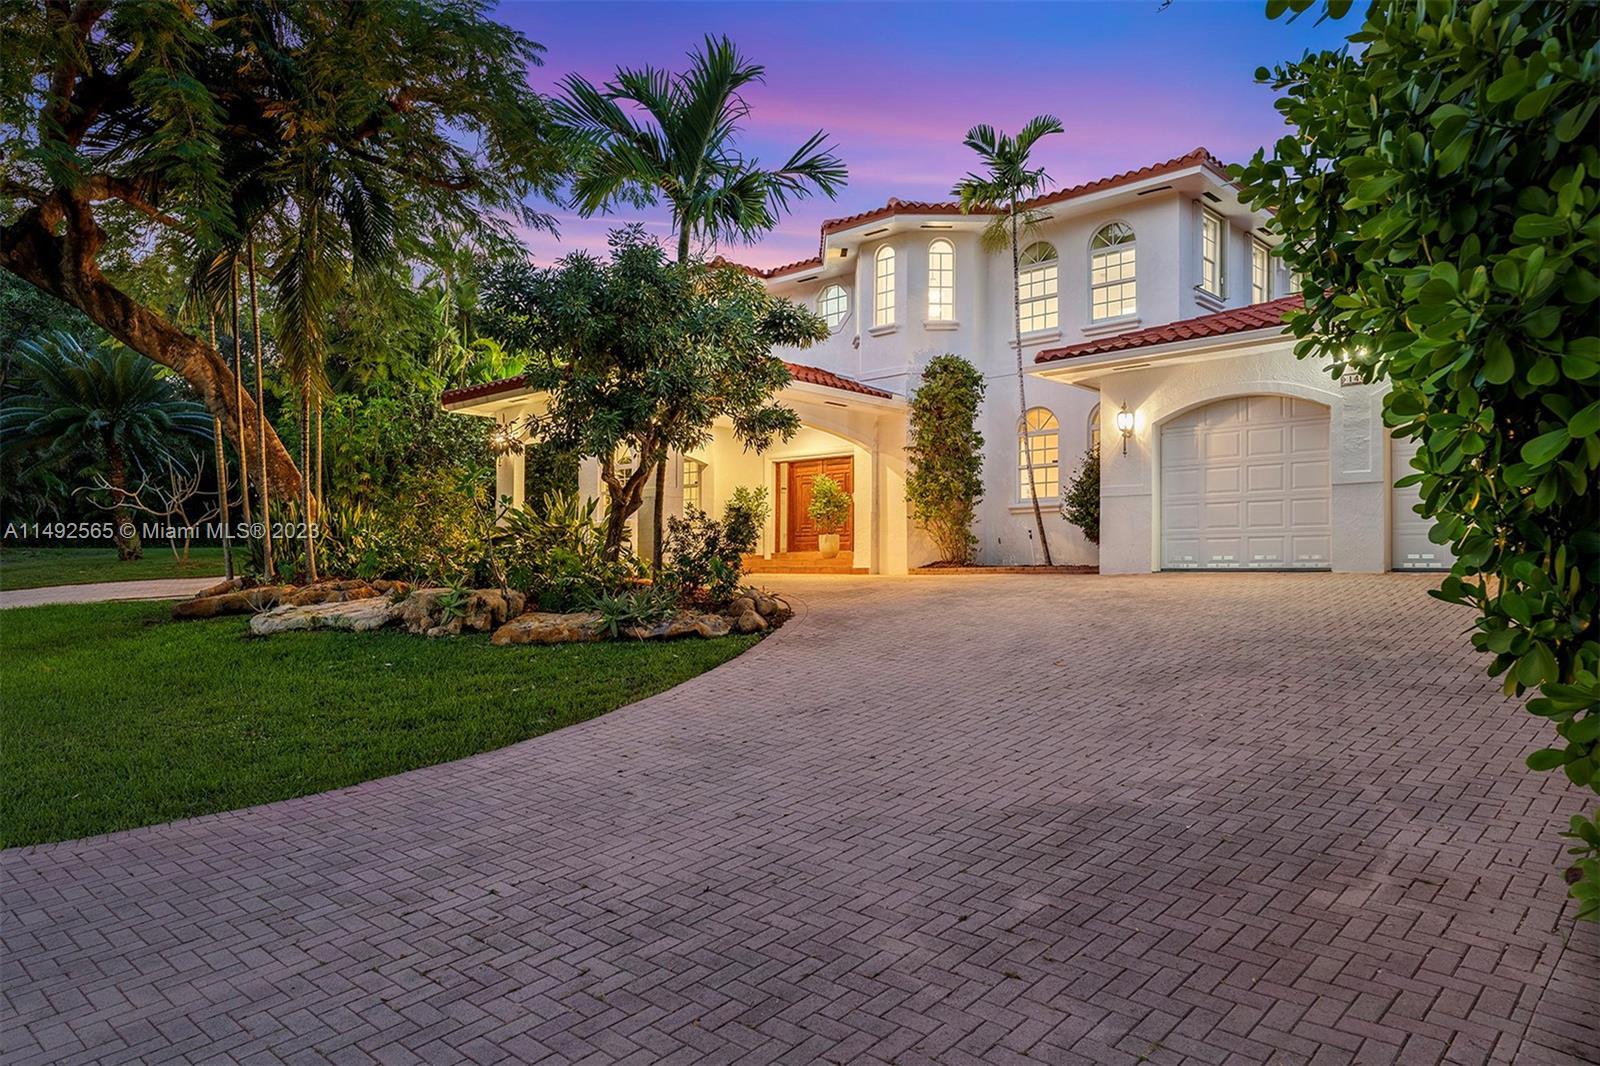 Photo of 145 W Sunrise Ave in Coral Gables, FL